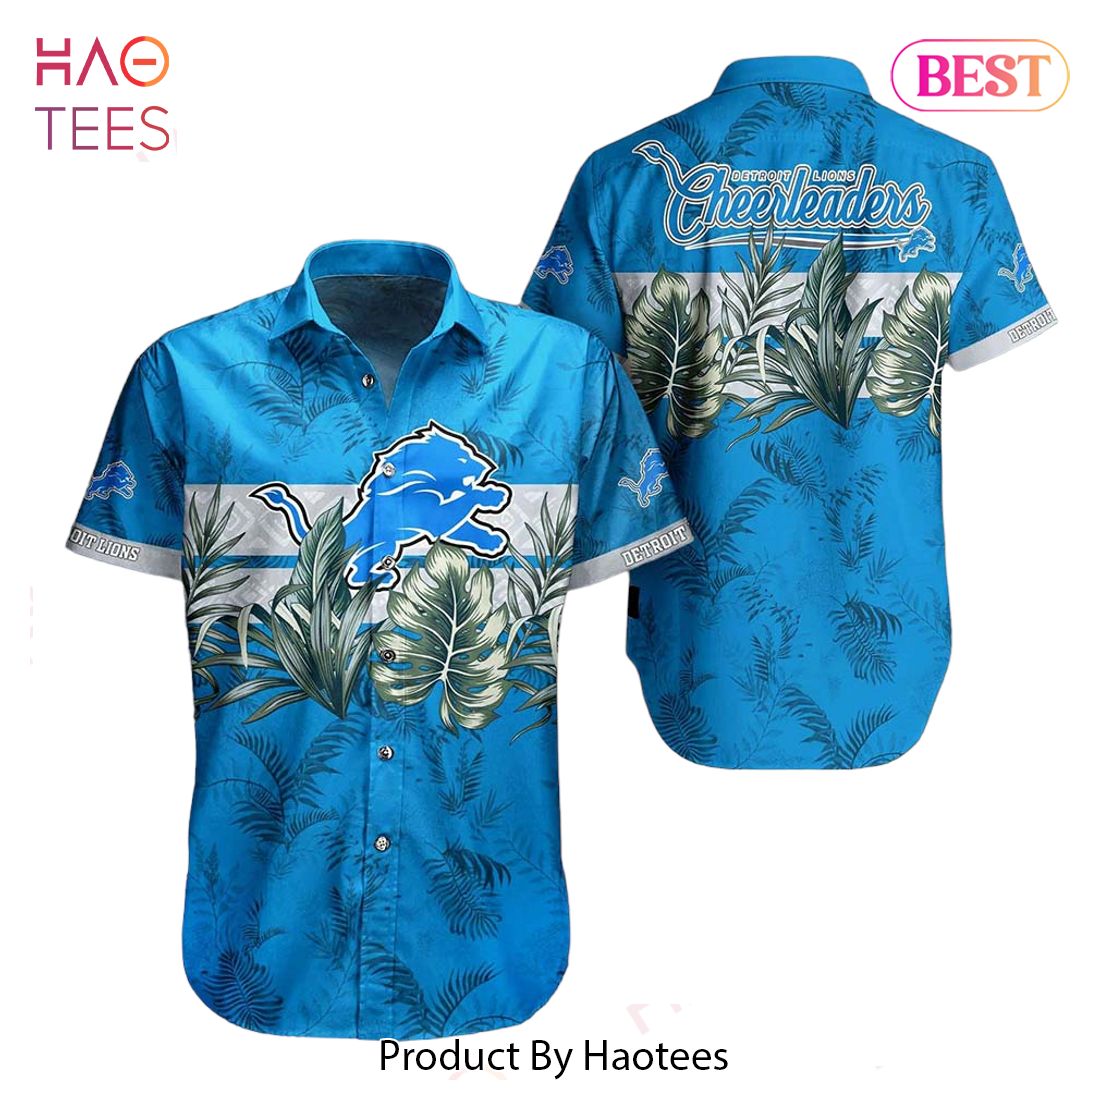 HOT TREND Detroit Lions NFL Hawaiian Shirt Tropical Pattern Graphic Gift For Fan NFL Enthusiast